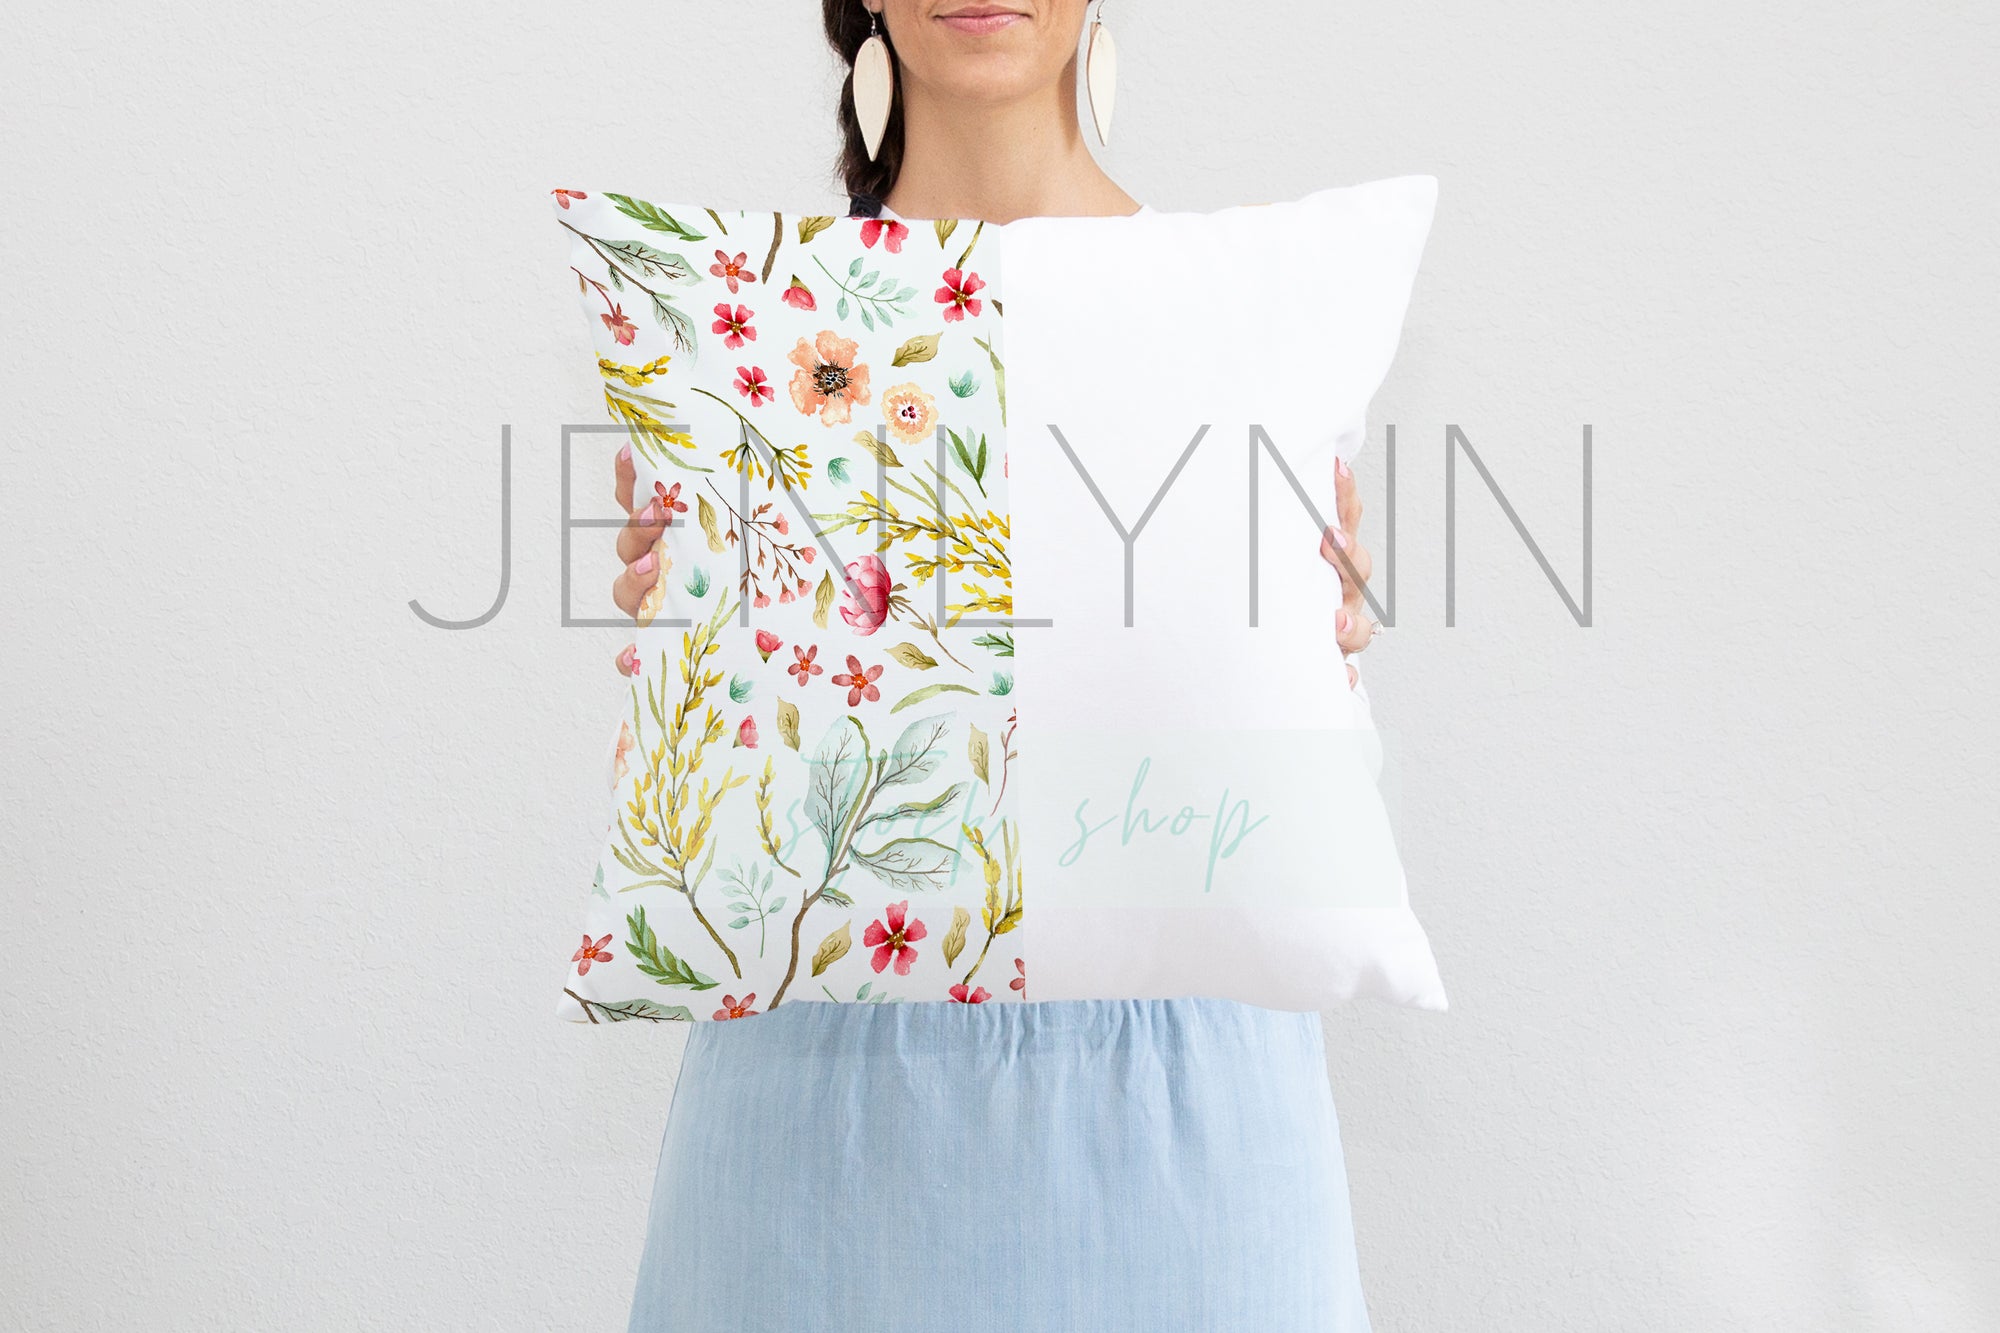 Woman Holding Square Pillow Mockup #10 PSD